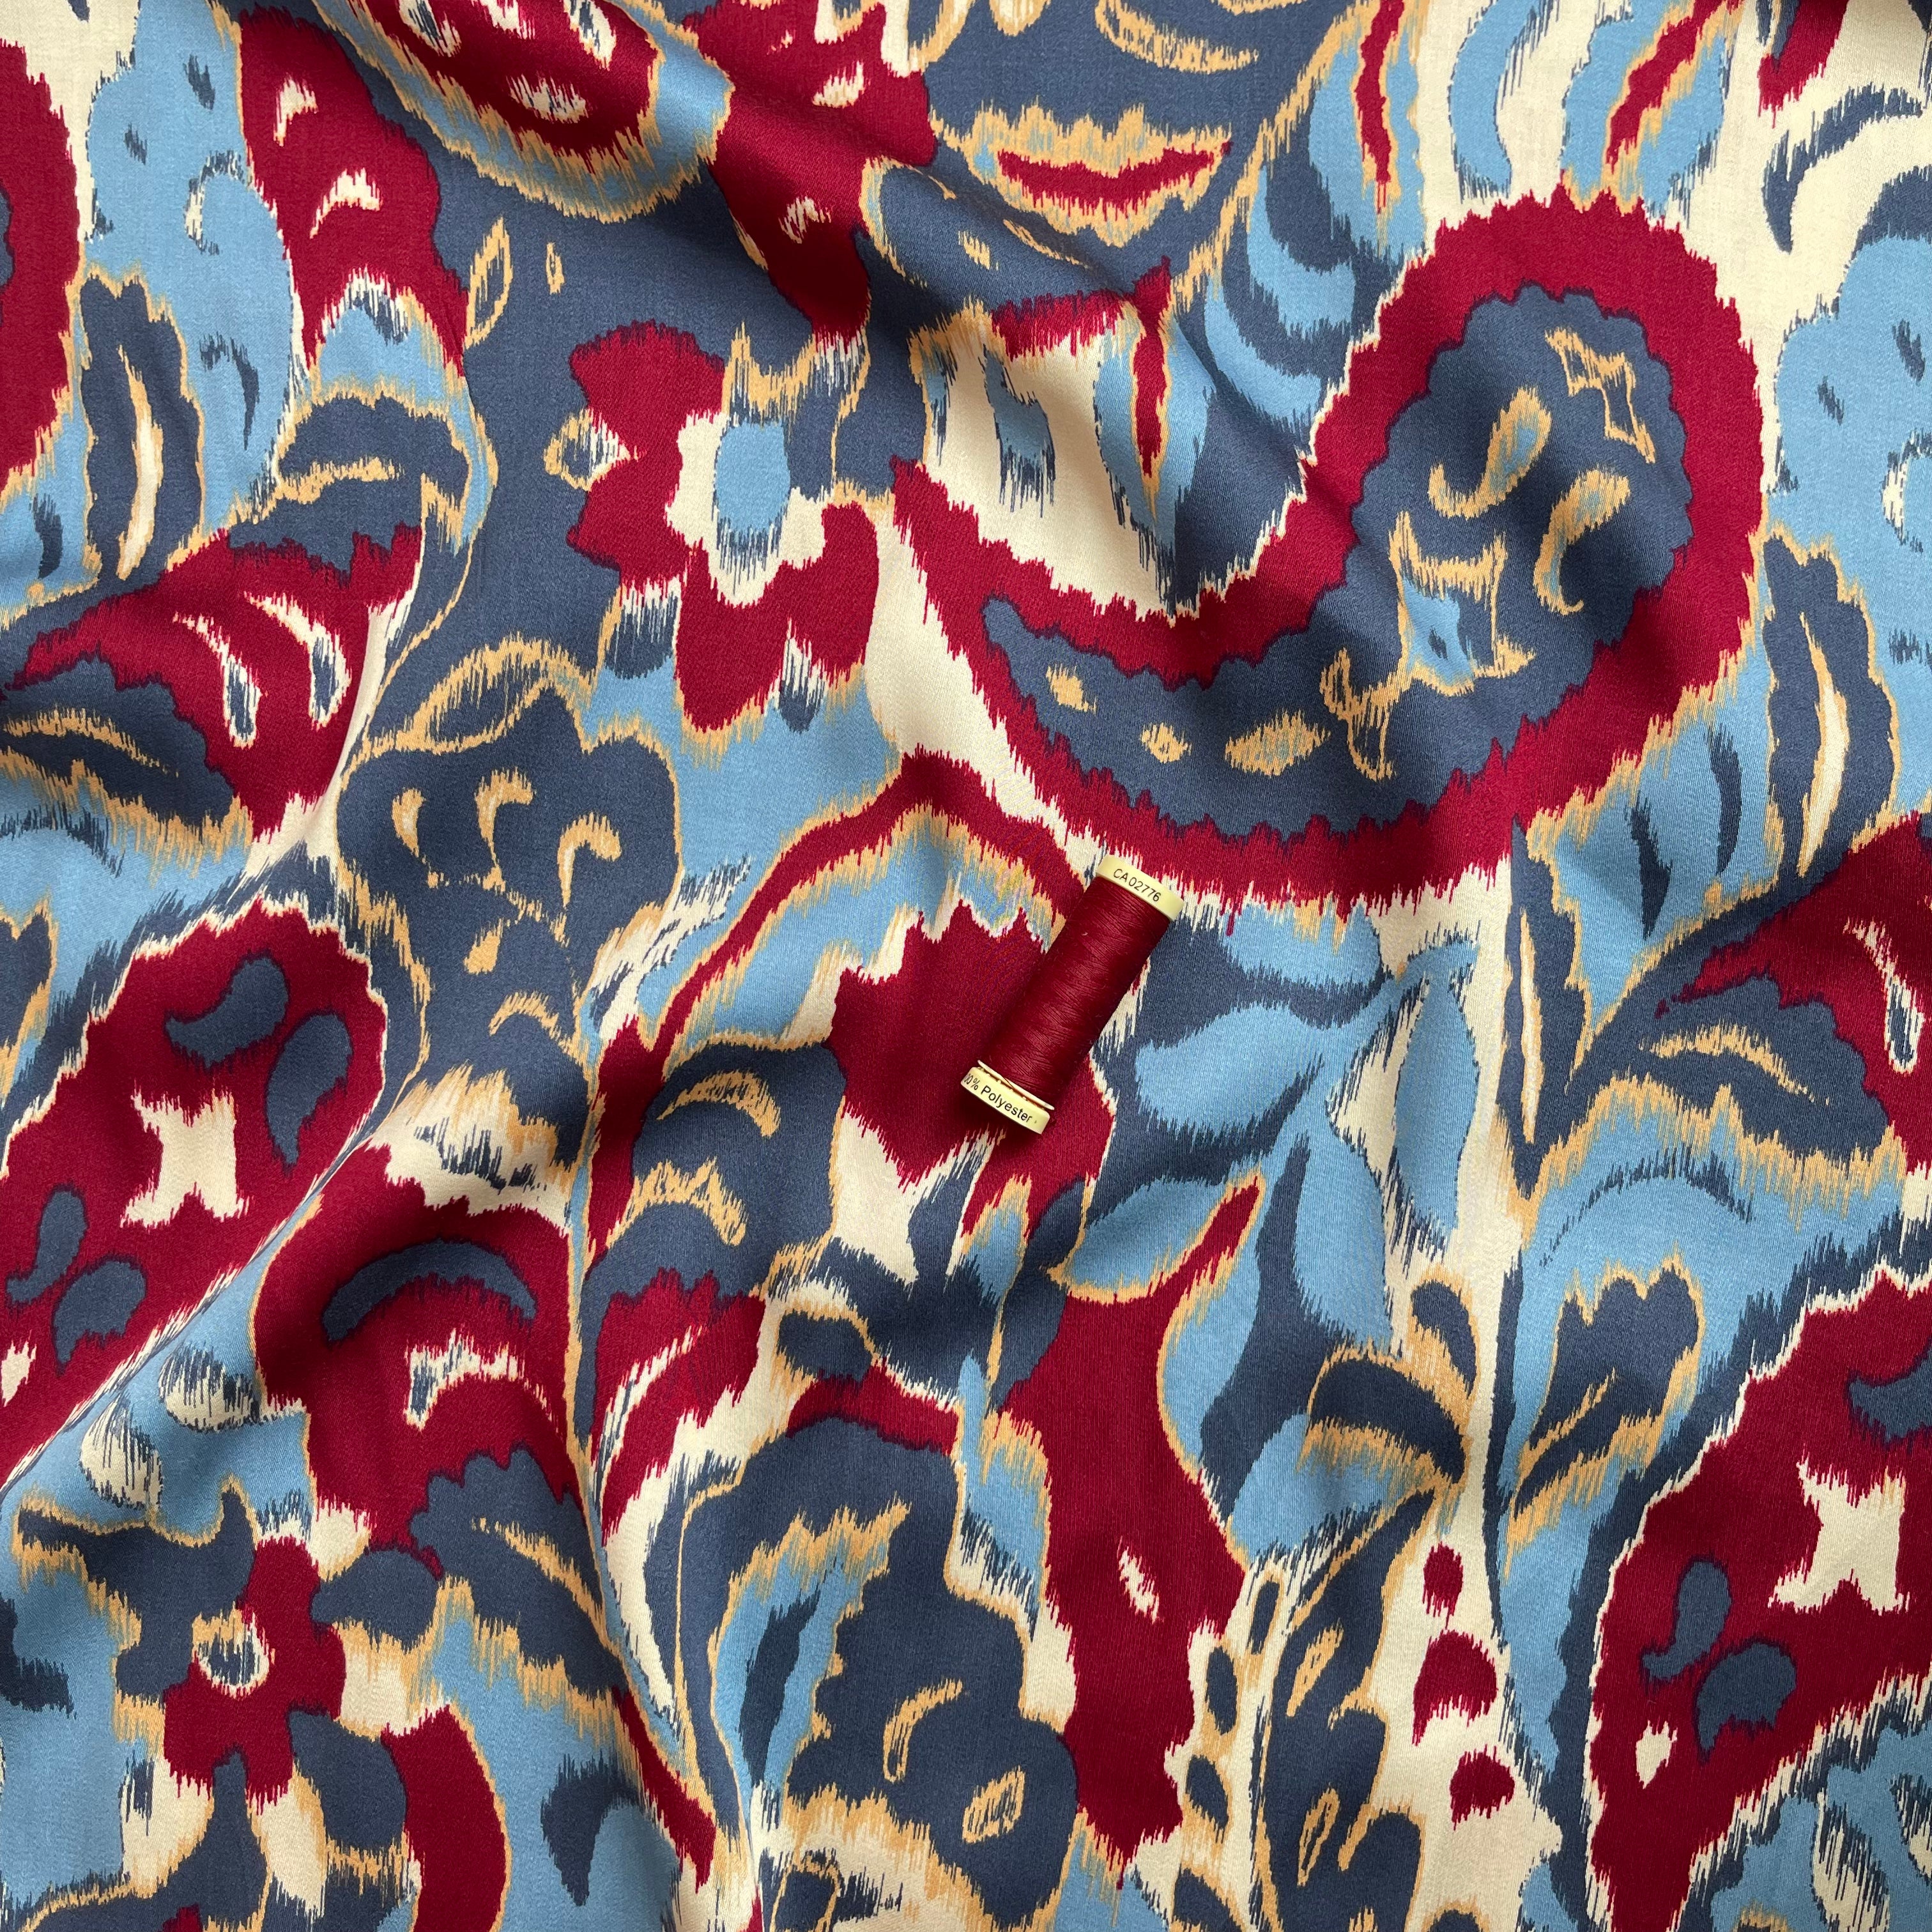 Hazy Paisley Blue and Red Viscose Sateen Fabric